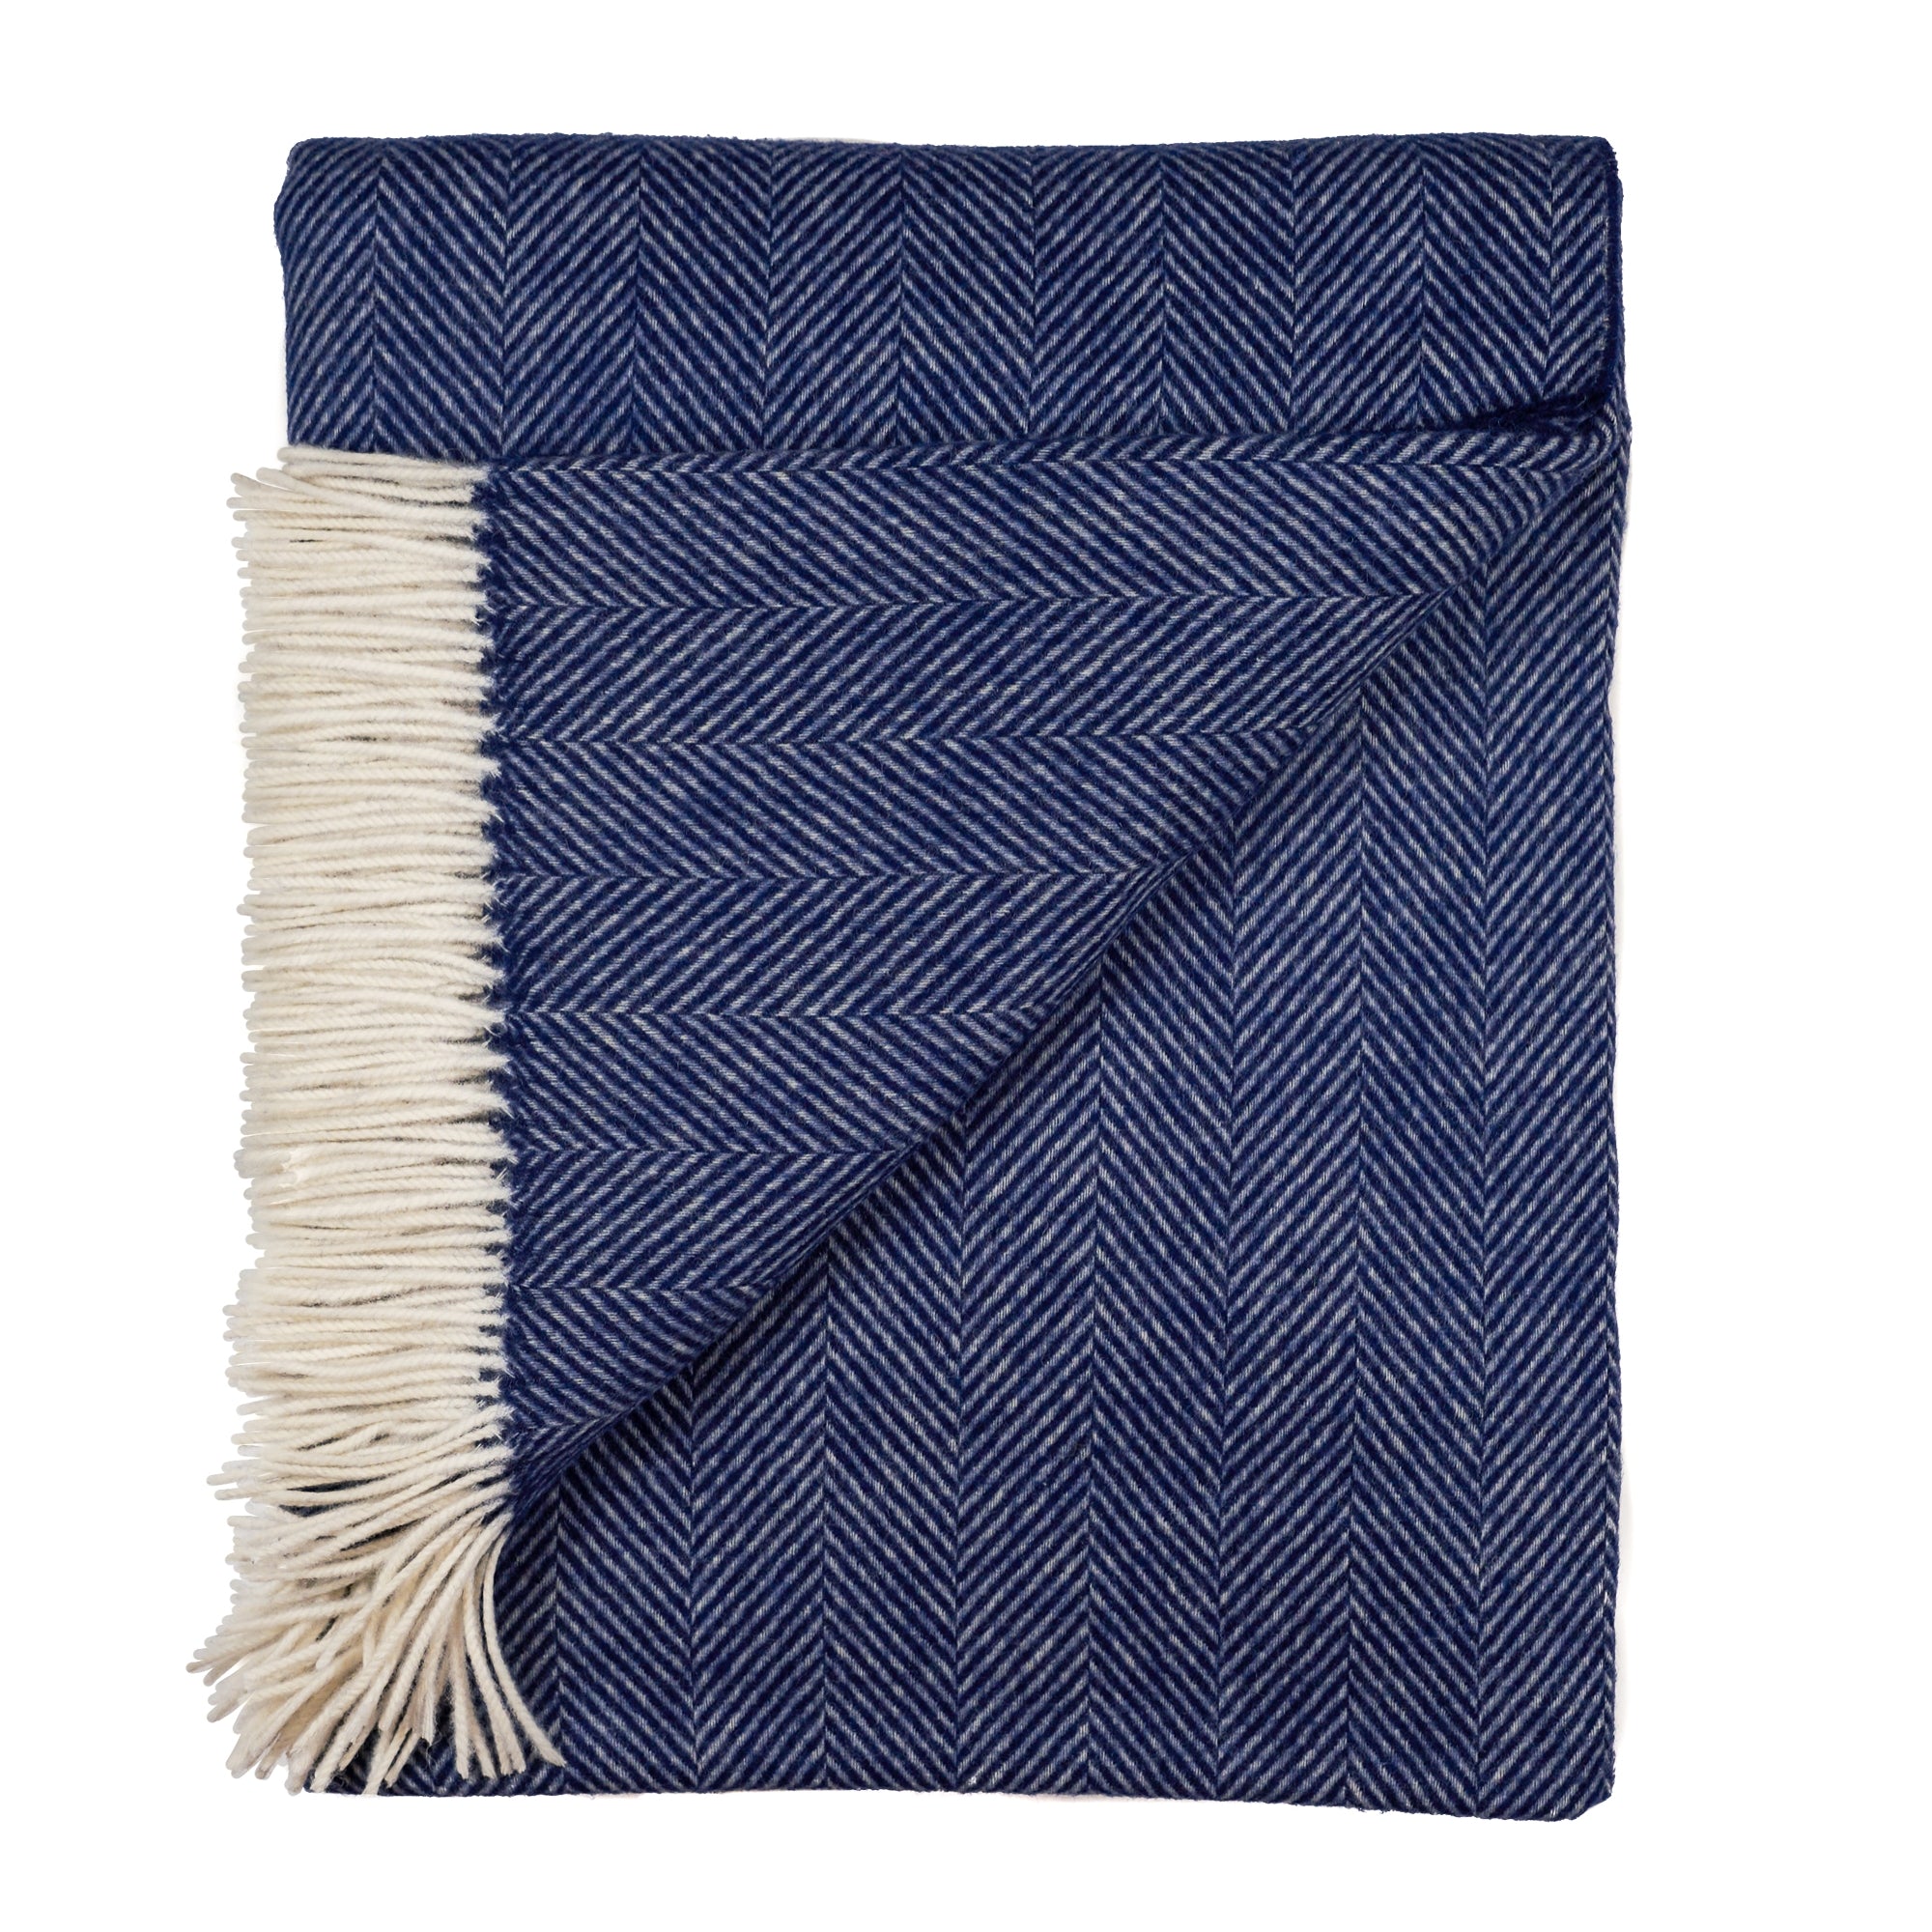 Luxury Throws and Blankets | Decoralist.com